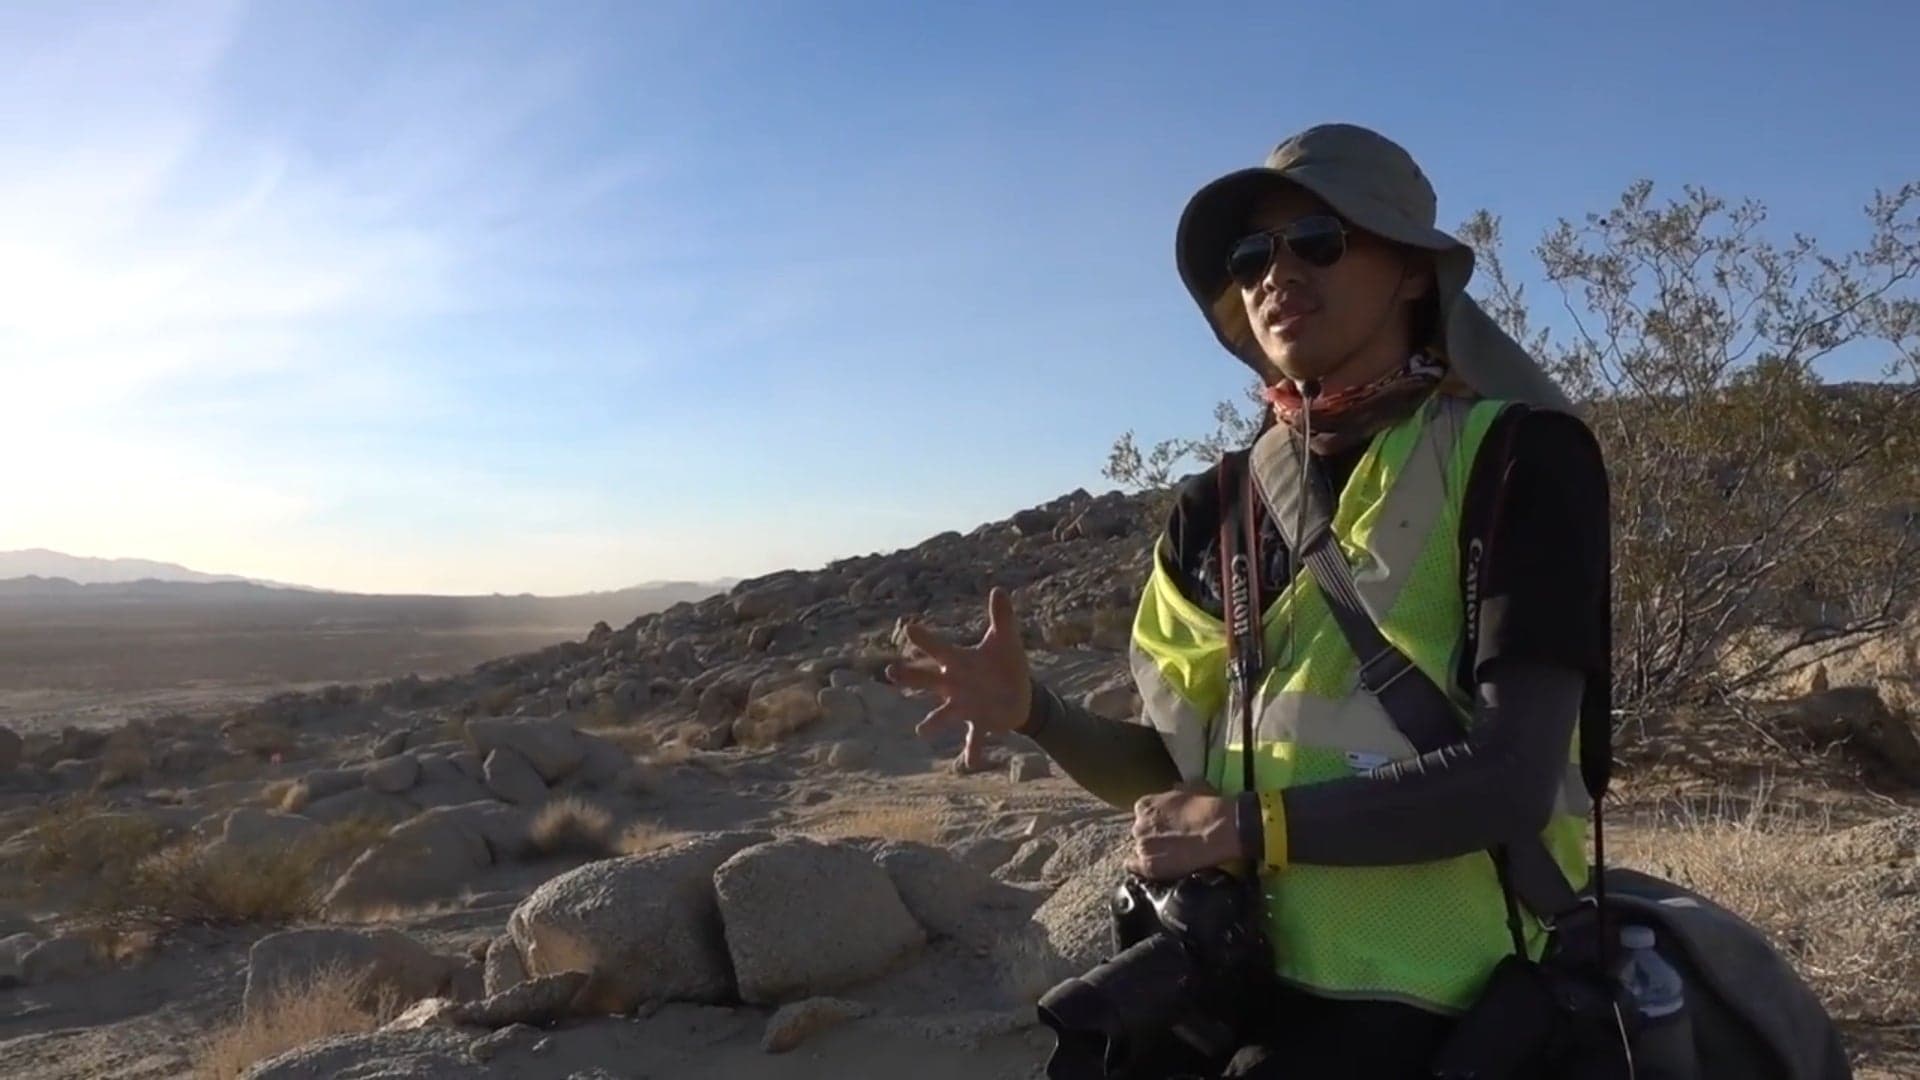 Watch and Learn as Photographer Larry Chen Shoots at King of the Hammers